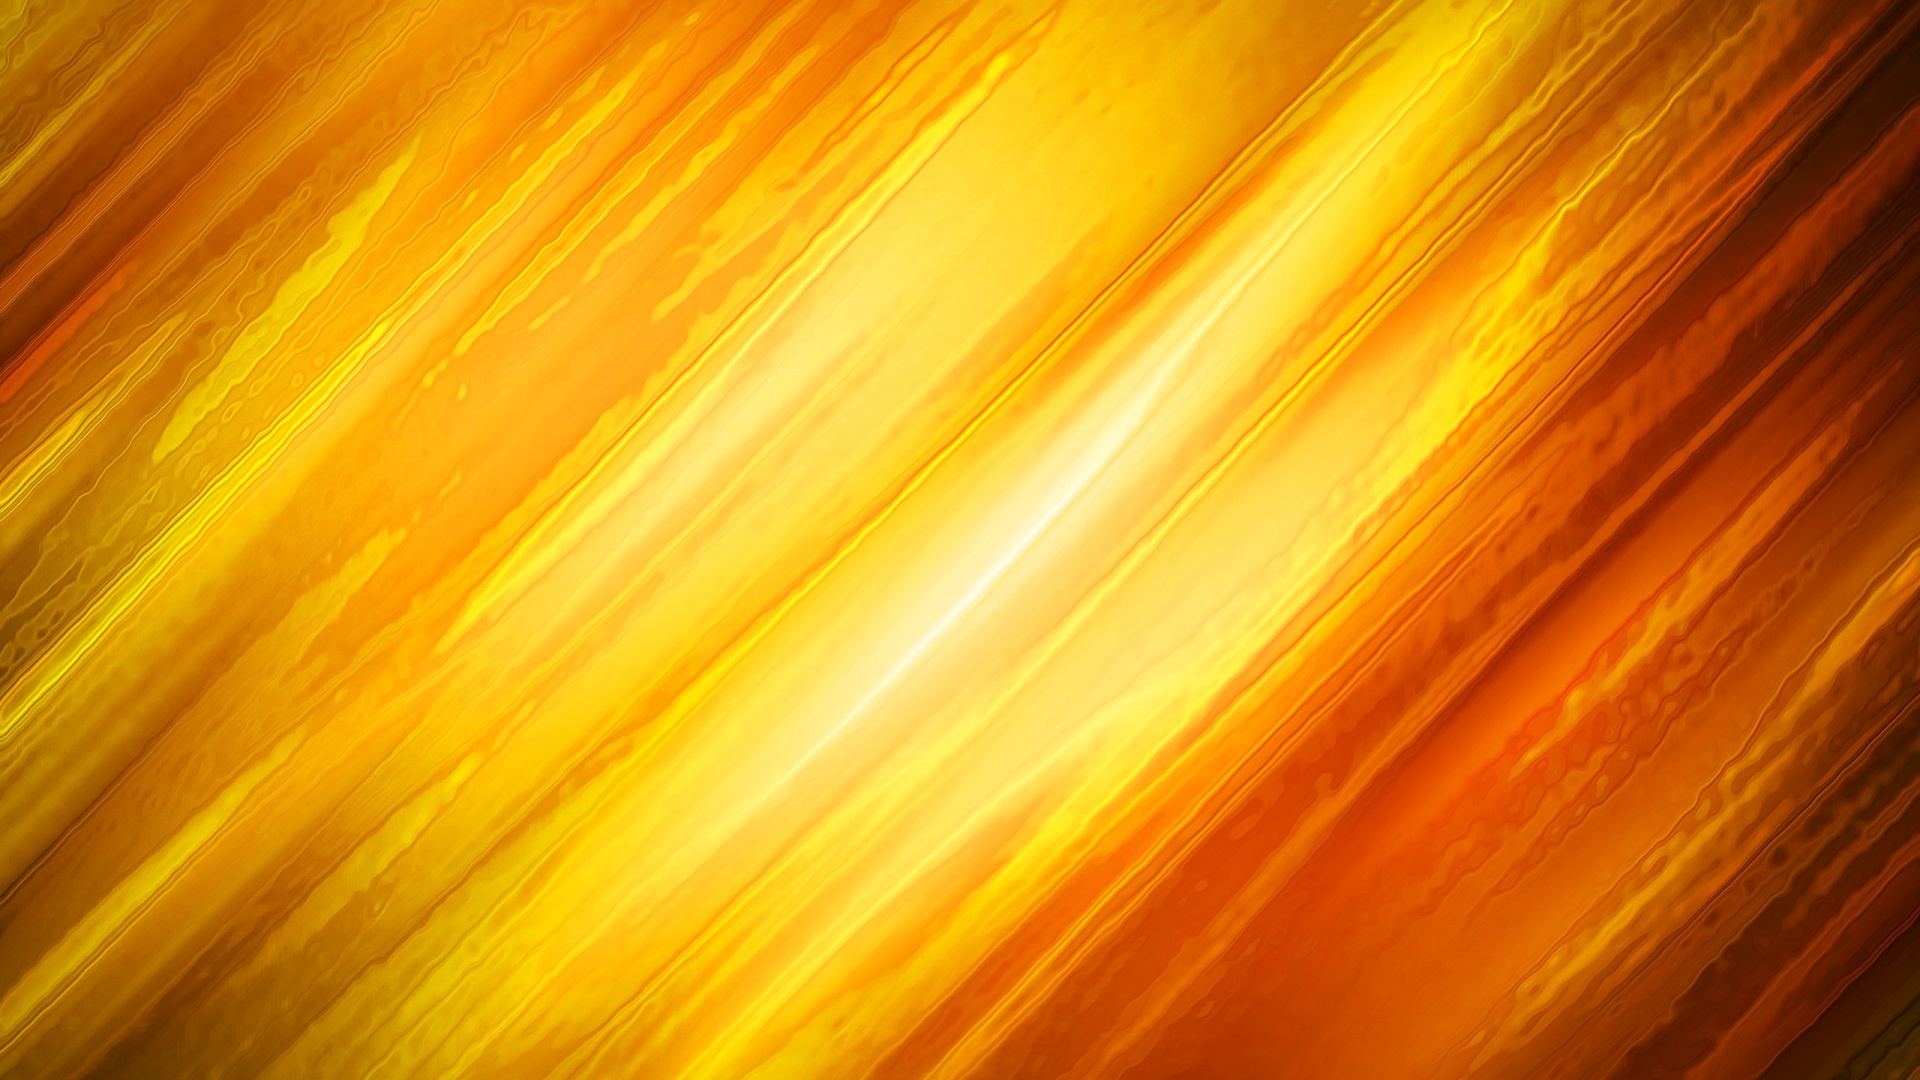  Abstract Yellow and Orange Background desktop PC and Mac wallpaper